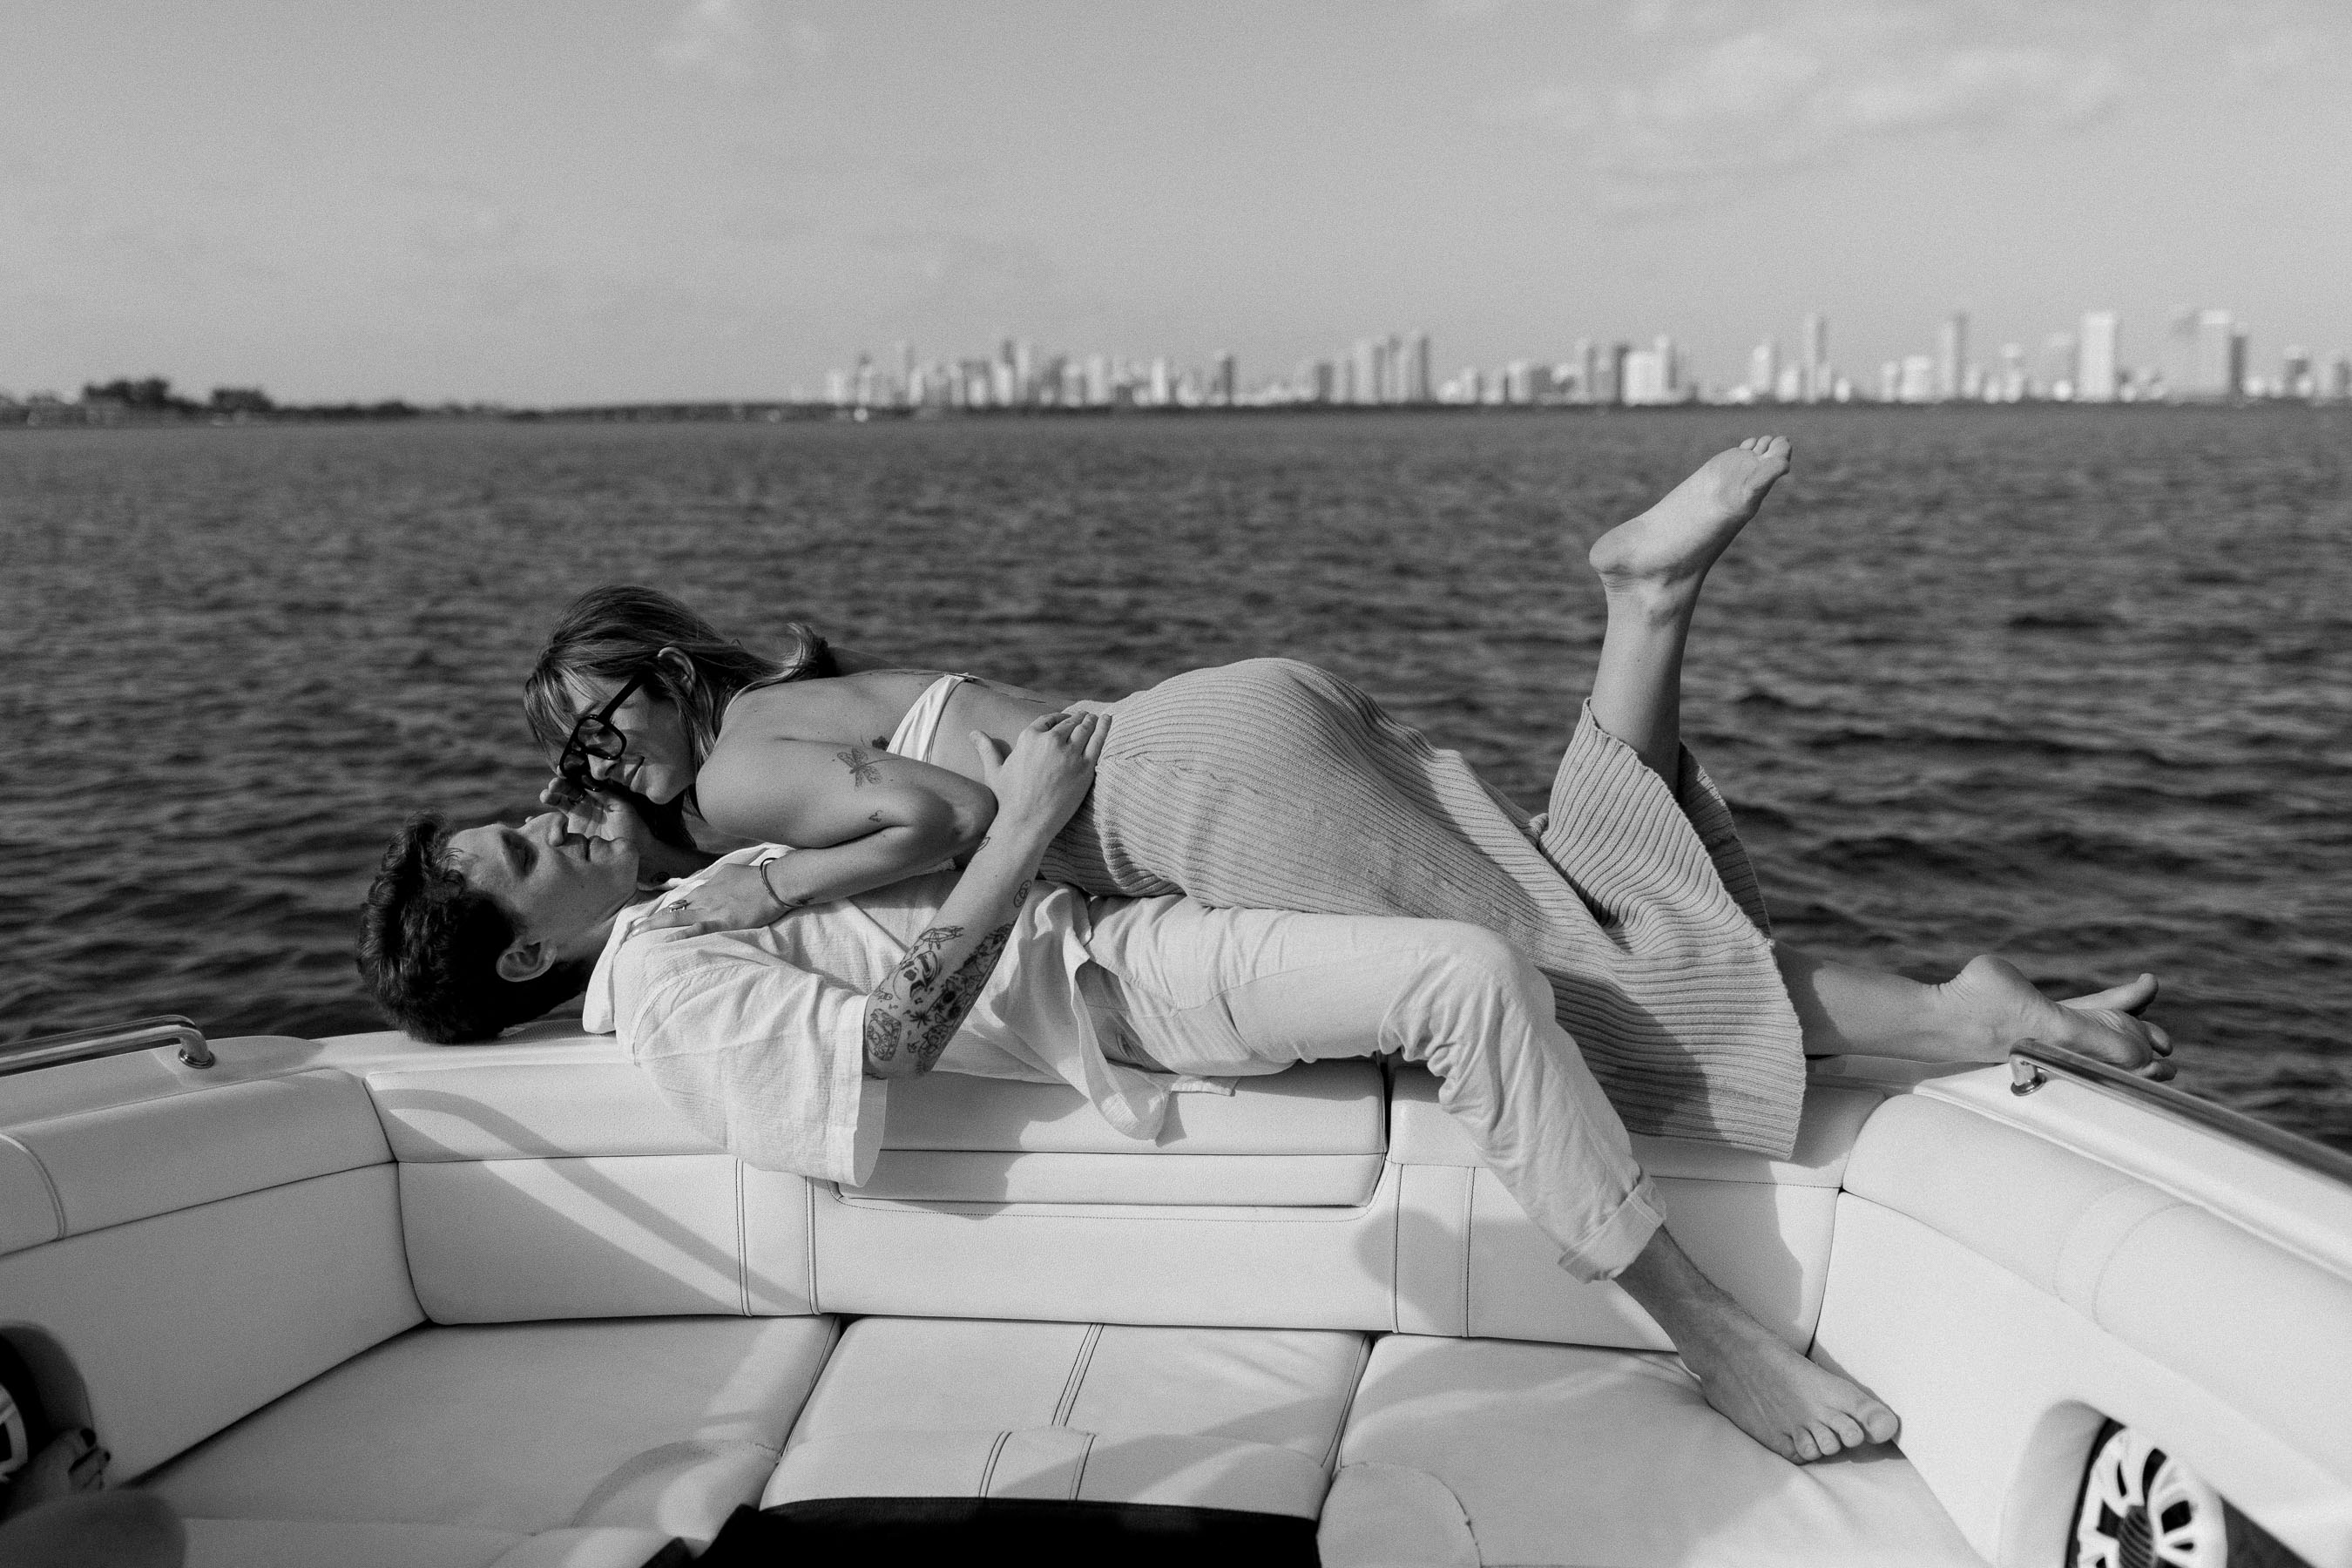 Lovers on a boat with Miami in the background